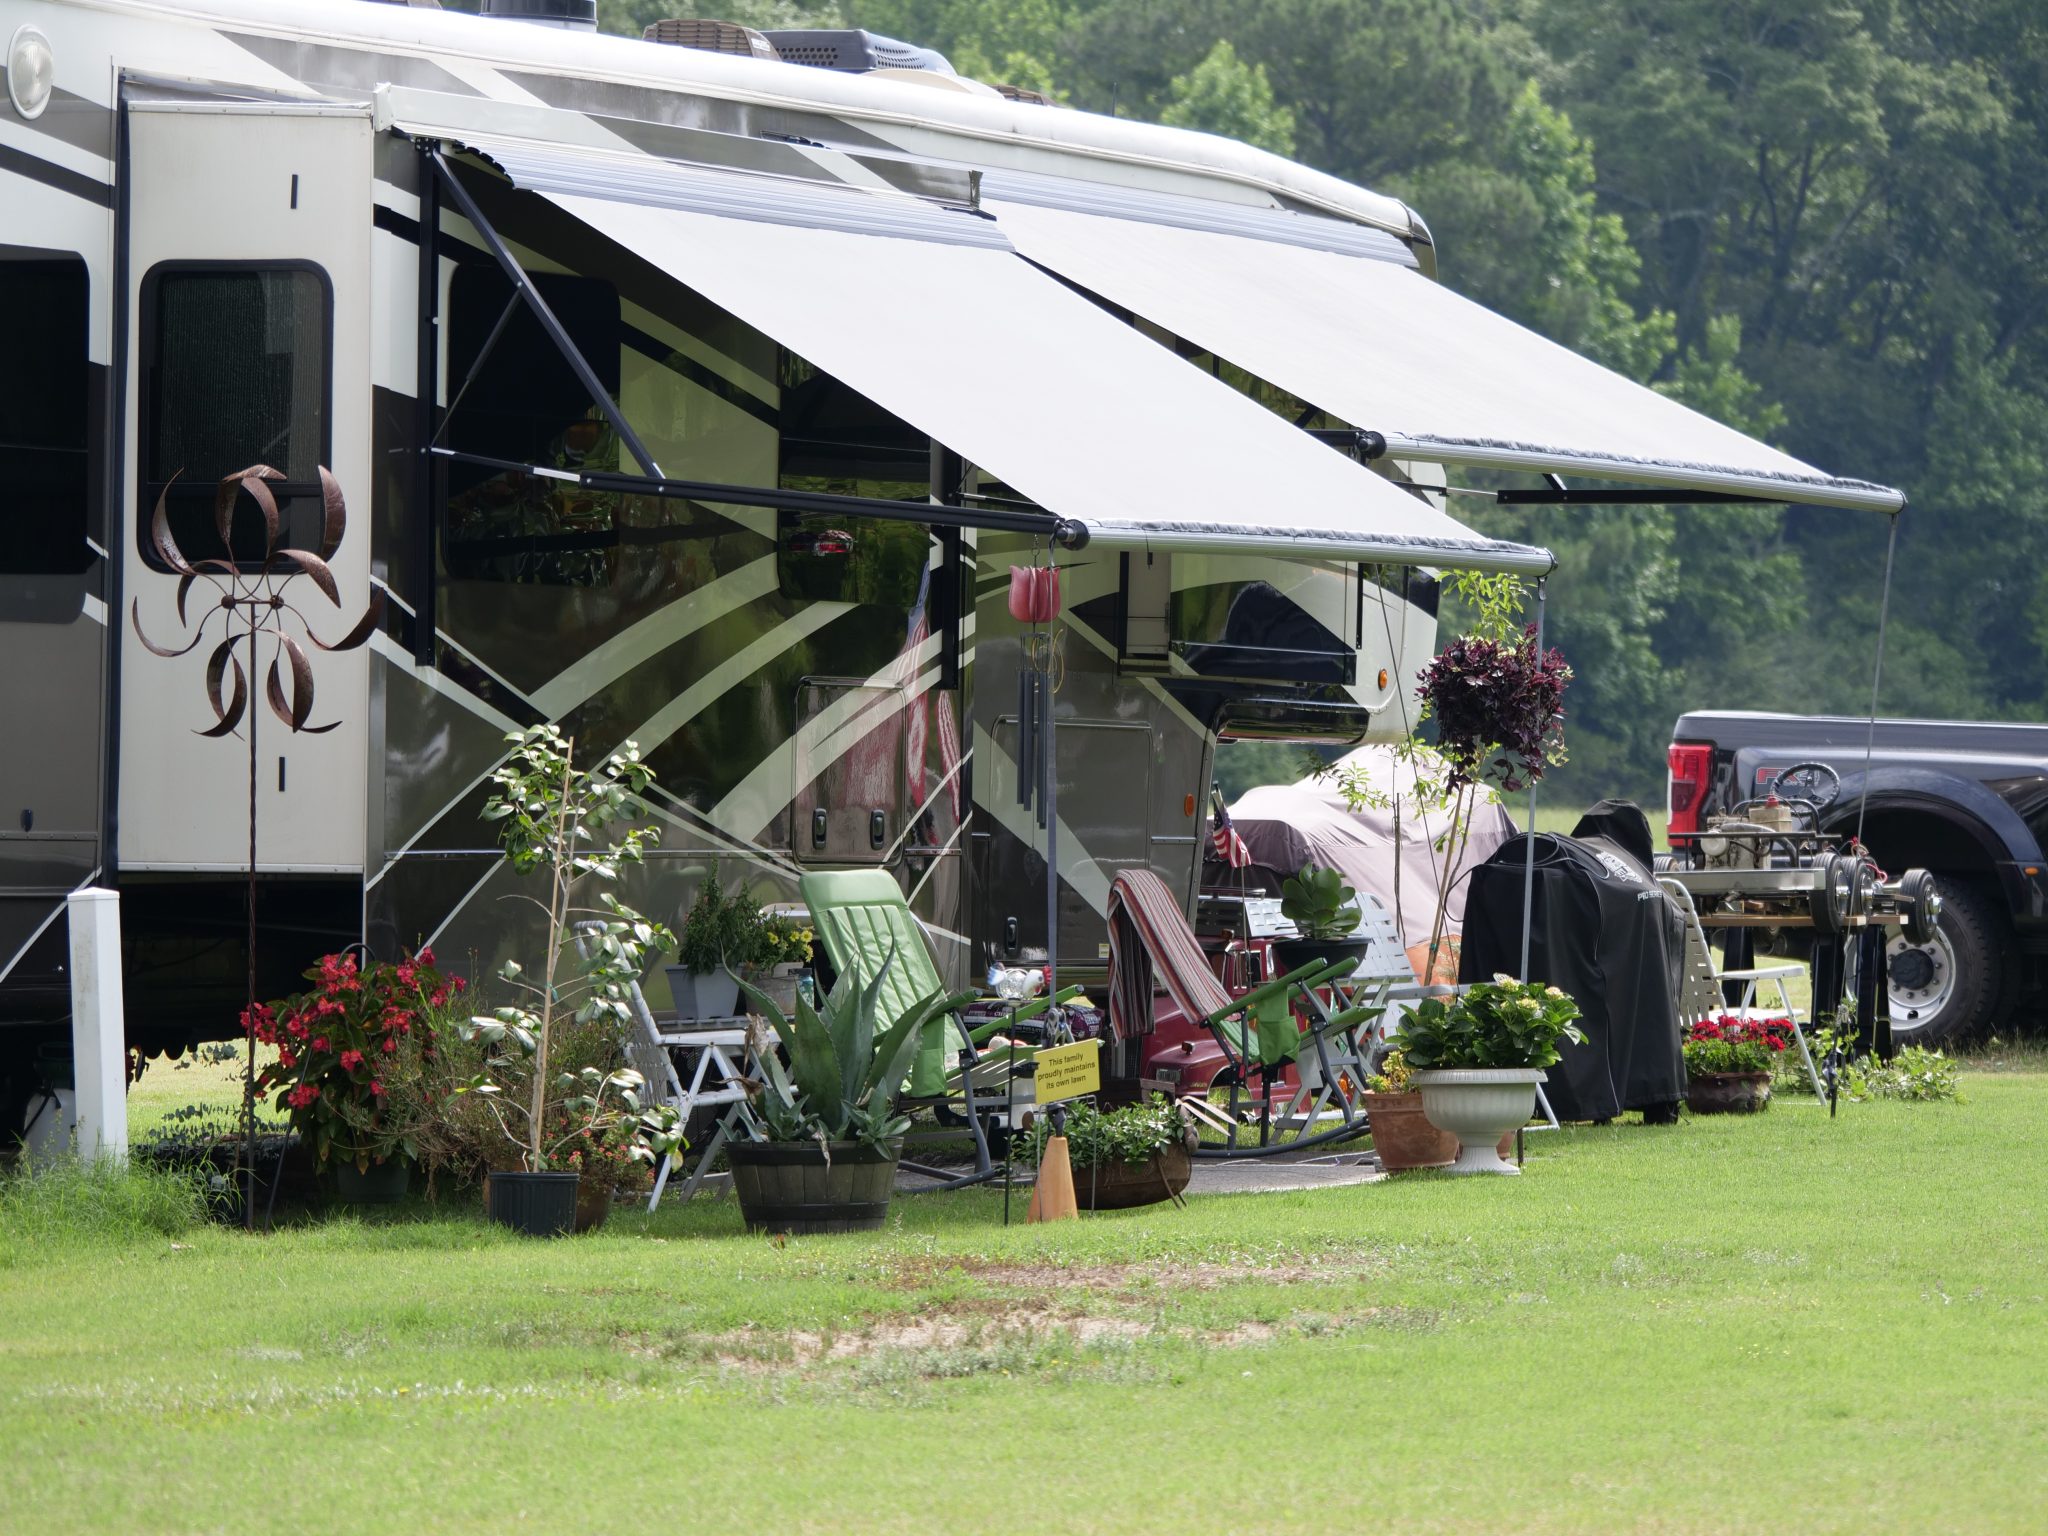 5 Signs You’ve Stayed Too Long at a Campground